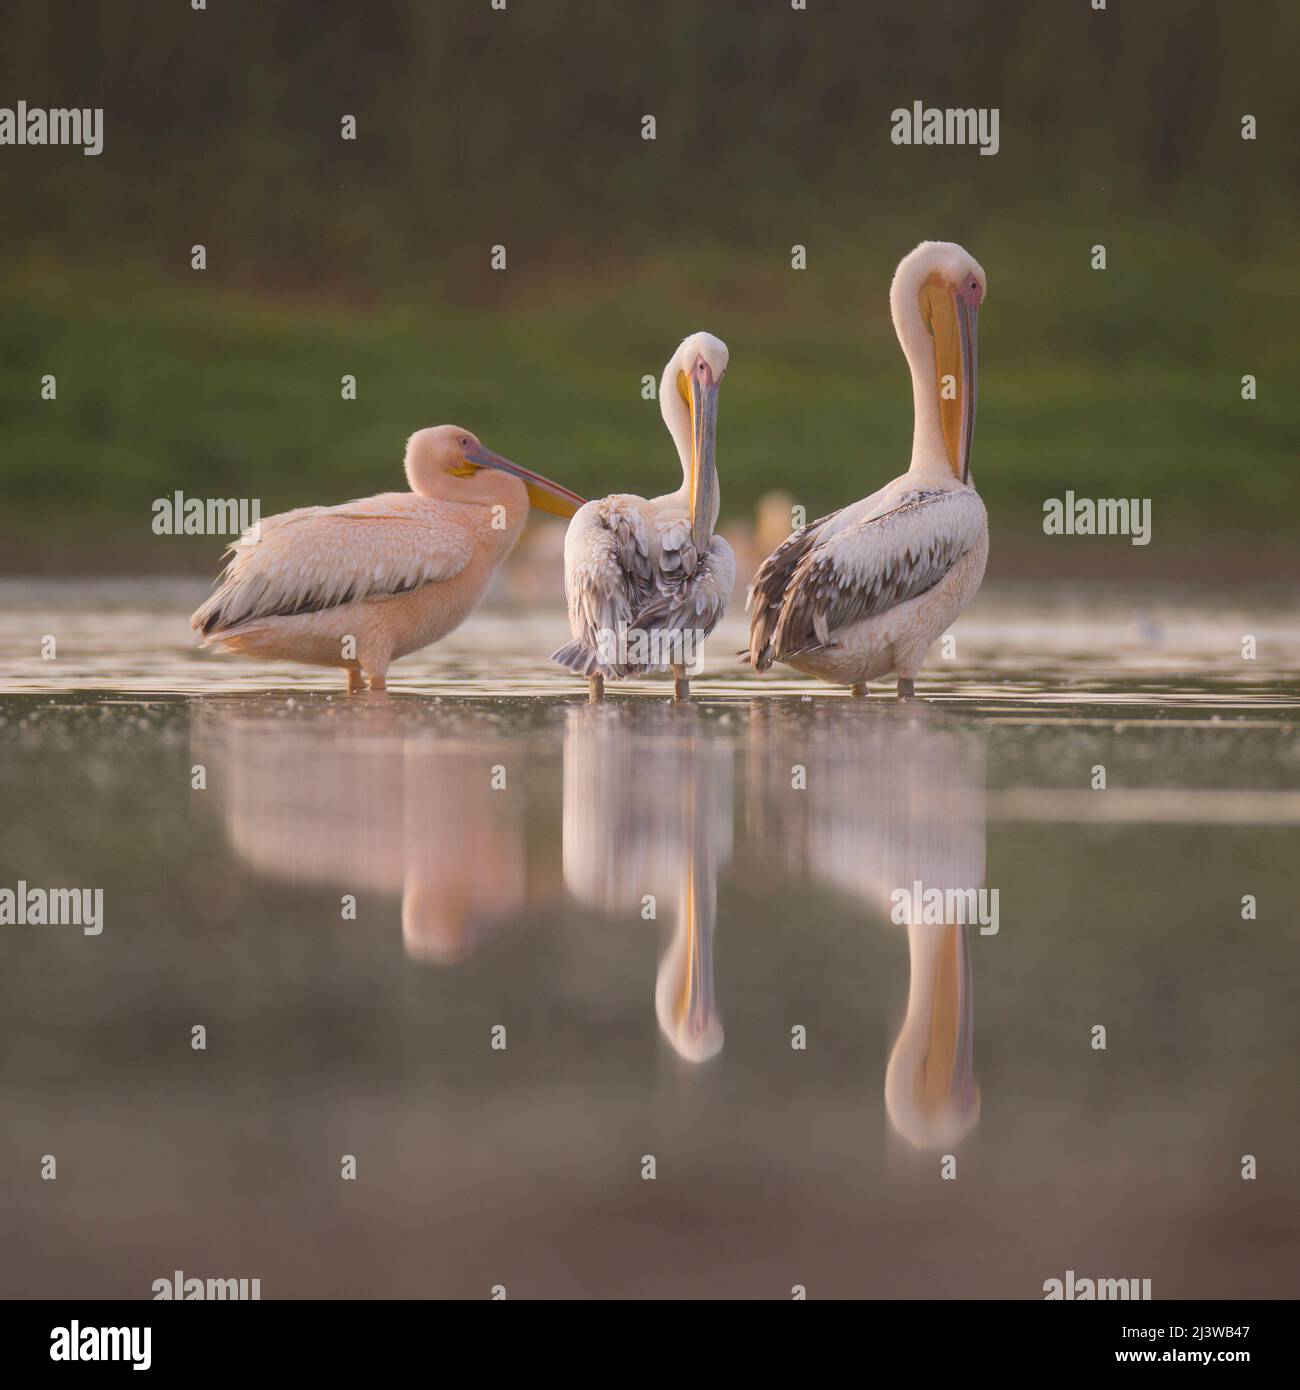 A flock of Pelicans Photographed in Israel in August Stock Photo